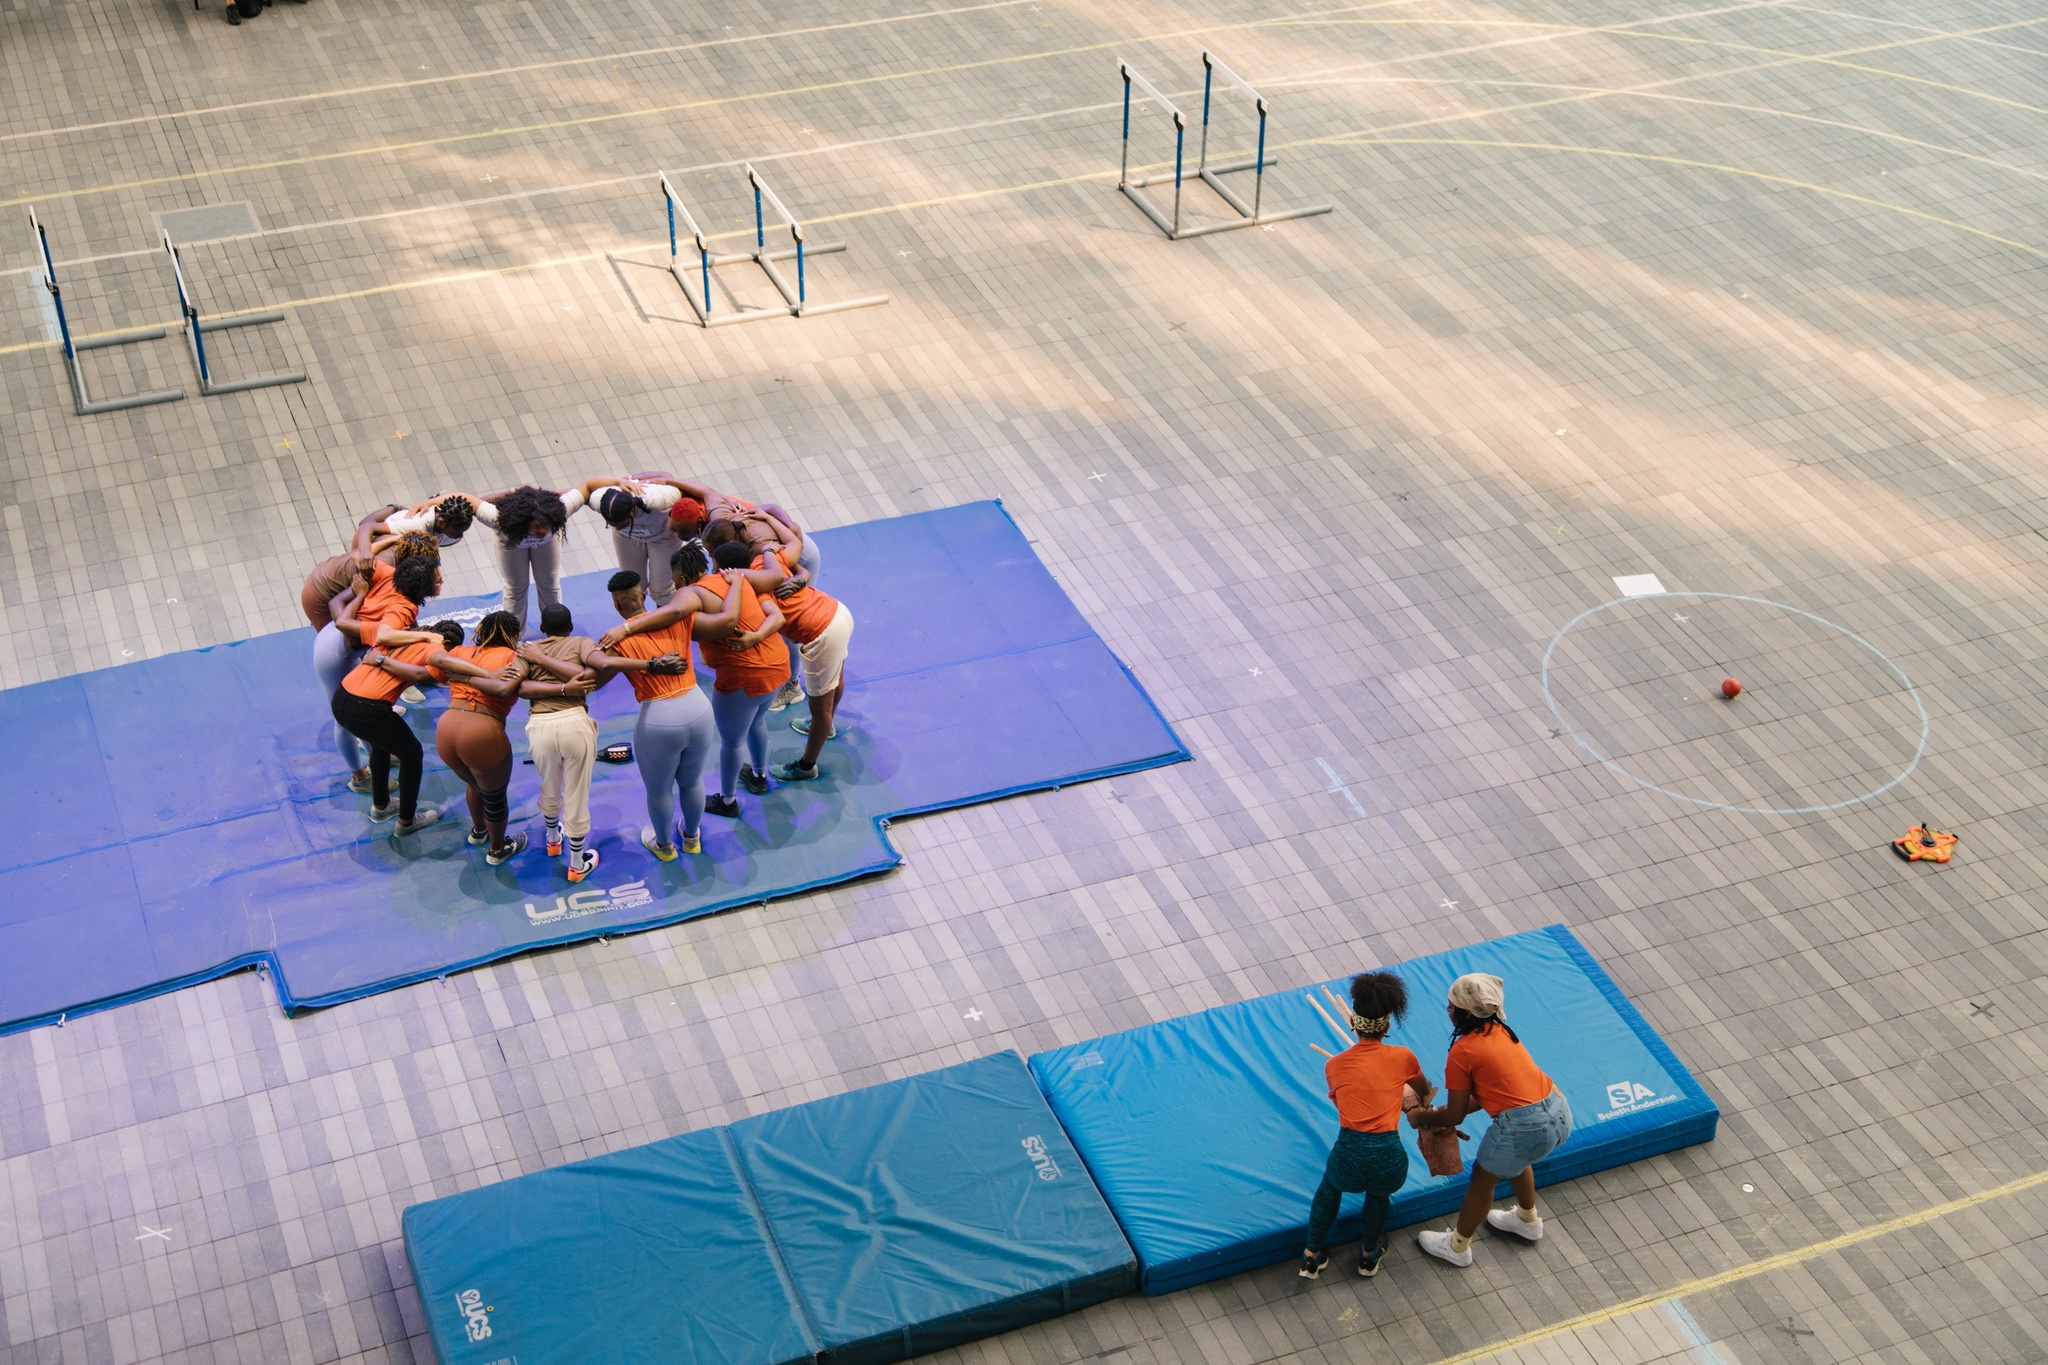 A group of track-and-field athletes huddle in a circle with arms interlaced around each other's shoulders. They stand on a blue atlhletic mat.